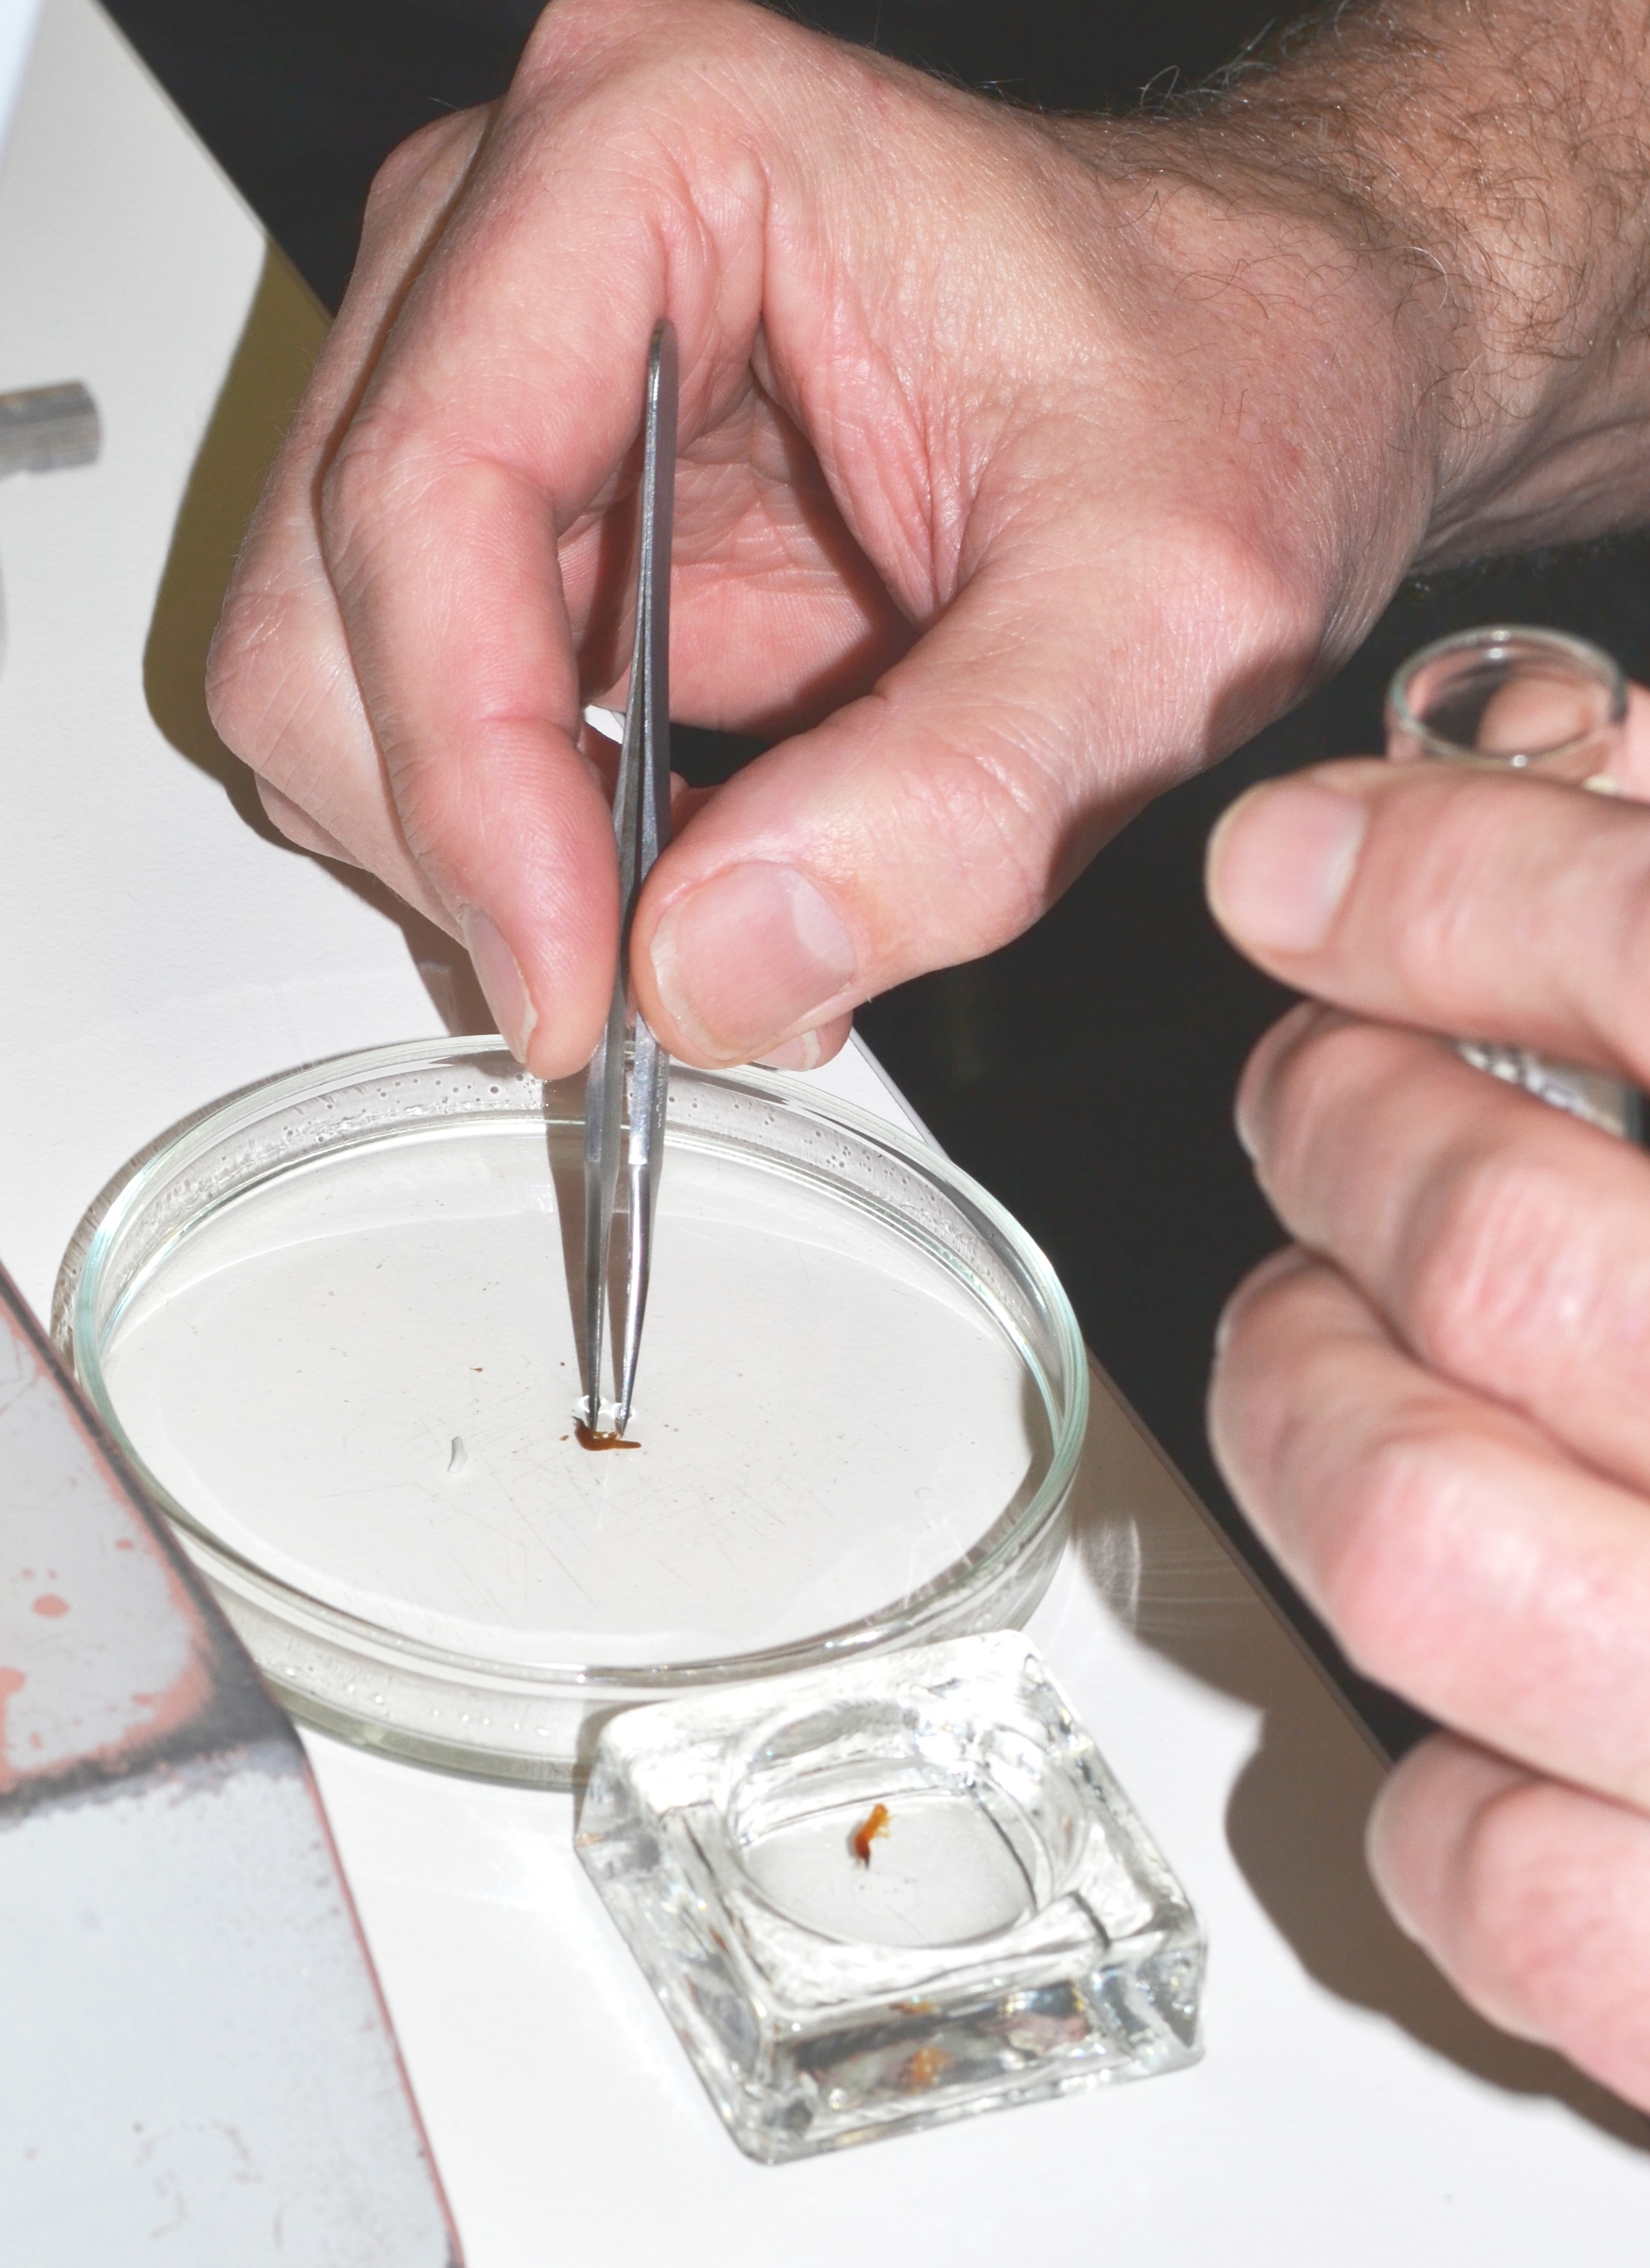 Person using tweezers to pick up an insect sample from petri dish